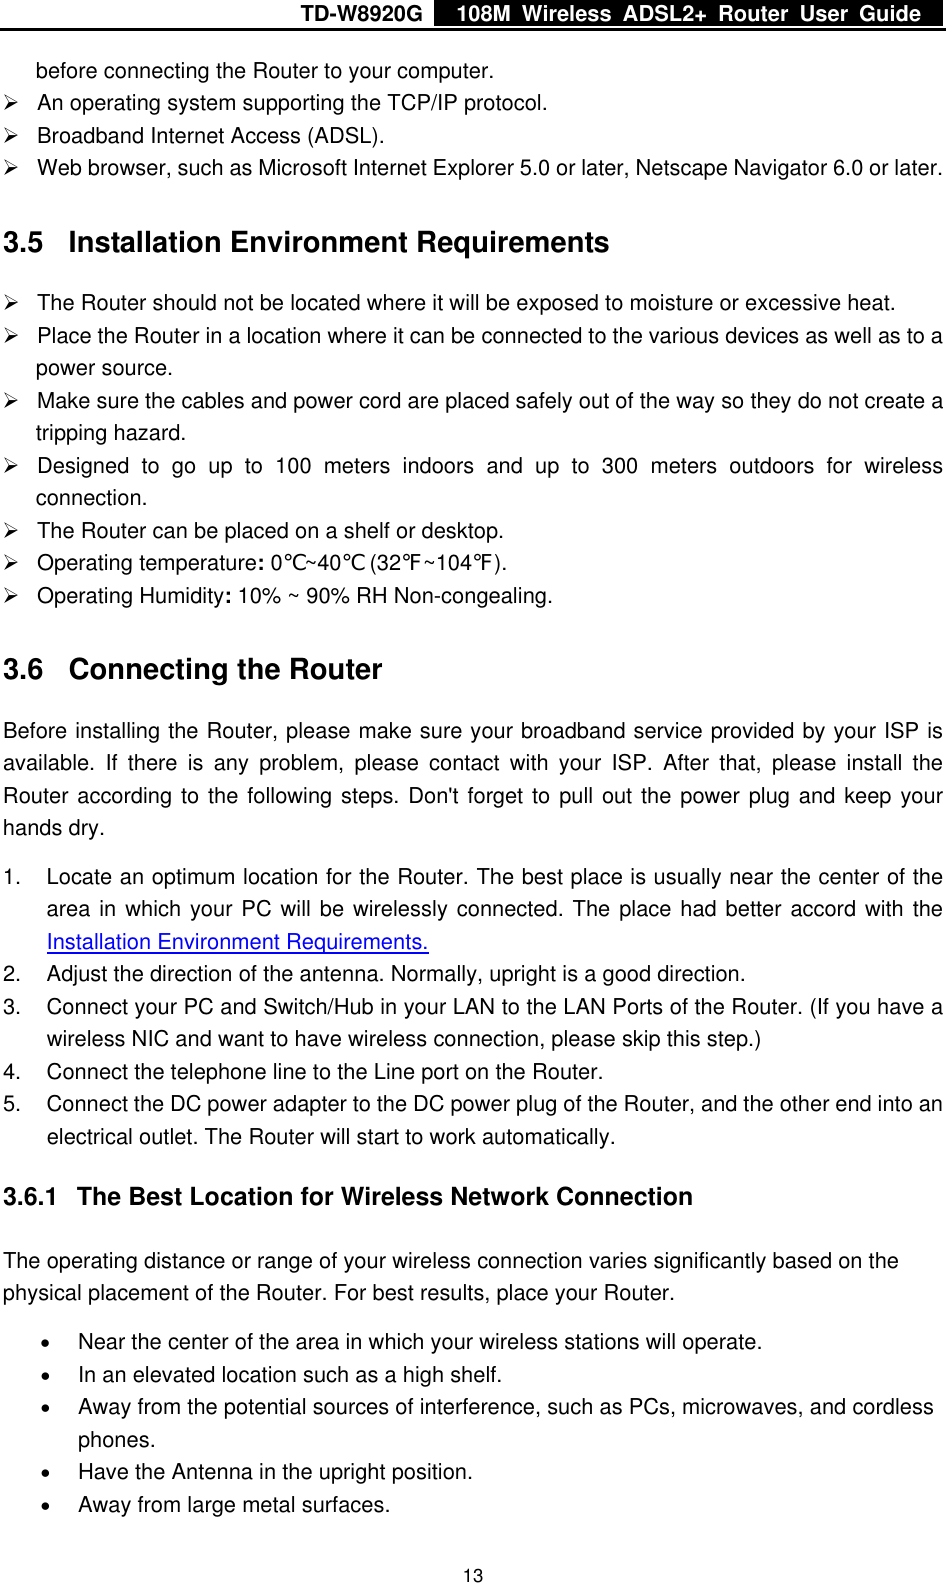 TD-W8920G    108M Wireless ADSL2+ Router User Guide    13before connecting the Router to your computer. ¾  An operating system supporting the TCP/IP protocol. ¾  Broadband Internet Access (ADSL). ¾  Web browser, such as Microsoft Internet Explorer 5.0 or later, Netscape Navigator 6.0 or later. 3.5  Installation Environment Requirements ¾  The Router should not be located where it will be exposed to moisture or excessive heat. ¾  Place the Router in a location where it can be connected to the various devices as well as to a power source. ¾  Make sure the cables and power cord are placed safely out of the way so they do not create a tripping hazard. ¾  Designed to go up to 100 meters indoors and up to 300 meters outdoors for wireless connection. ¾  The Router can be placed on a shelf or desktop. ¾ Operating temperature: 0℃~40℃ (32℉~104℉). ¾ Operating Humidity: 10% ~ 90% RH Non-congealing. 3.6  Connecting the Router Before installing the Router, please make sure your broadband service provided by your ISP is available. If there is any problem, please contact with your ISP. After that, please install the Router according to the following steps. Don&apos;t forget to pull out the power plug and keep your hands dry. 1.  Locate an optimum location for the Router. The best place is usually near the center of the area in which your PC will be wirelessly connected. The place had better accord with the Installation Environment Requirements. 2.  Adjust the direction of the antenna. Normally, upright is a good direction. 3.  Connect your PC and Switch/Hub in your LAN to the LAN Ports of the Router. (If you have a wireless NIC and want to have wireless connection, please skip this step.) 4.  Connect the telephone line to the Line port on the Router. 5.  Connect the DC power adapter to the DC power plug of the Router, and the other end into an electrical outlet. The Router will start to work automatically. 3.6.1  The Best Location for Wireless Network Connection The operating distance or range of your wireless connection varies significantly based on the physical placement of the Router. For best results, place your Router. • Near the center of the area in which your wireless stations will operate. • In an elevated location such as a high shelf. • Away from the potential sources of interference, such as PCs, microwaves, and cordless phones. • Have the Antenna in the upright position. • Away from large metal surfaces. 